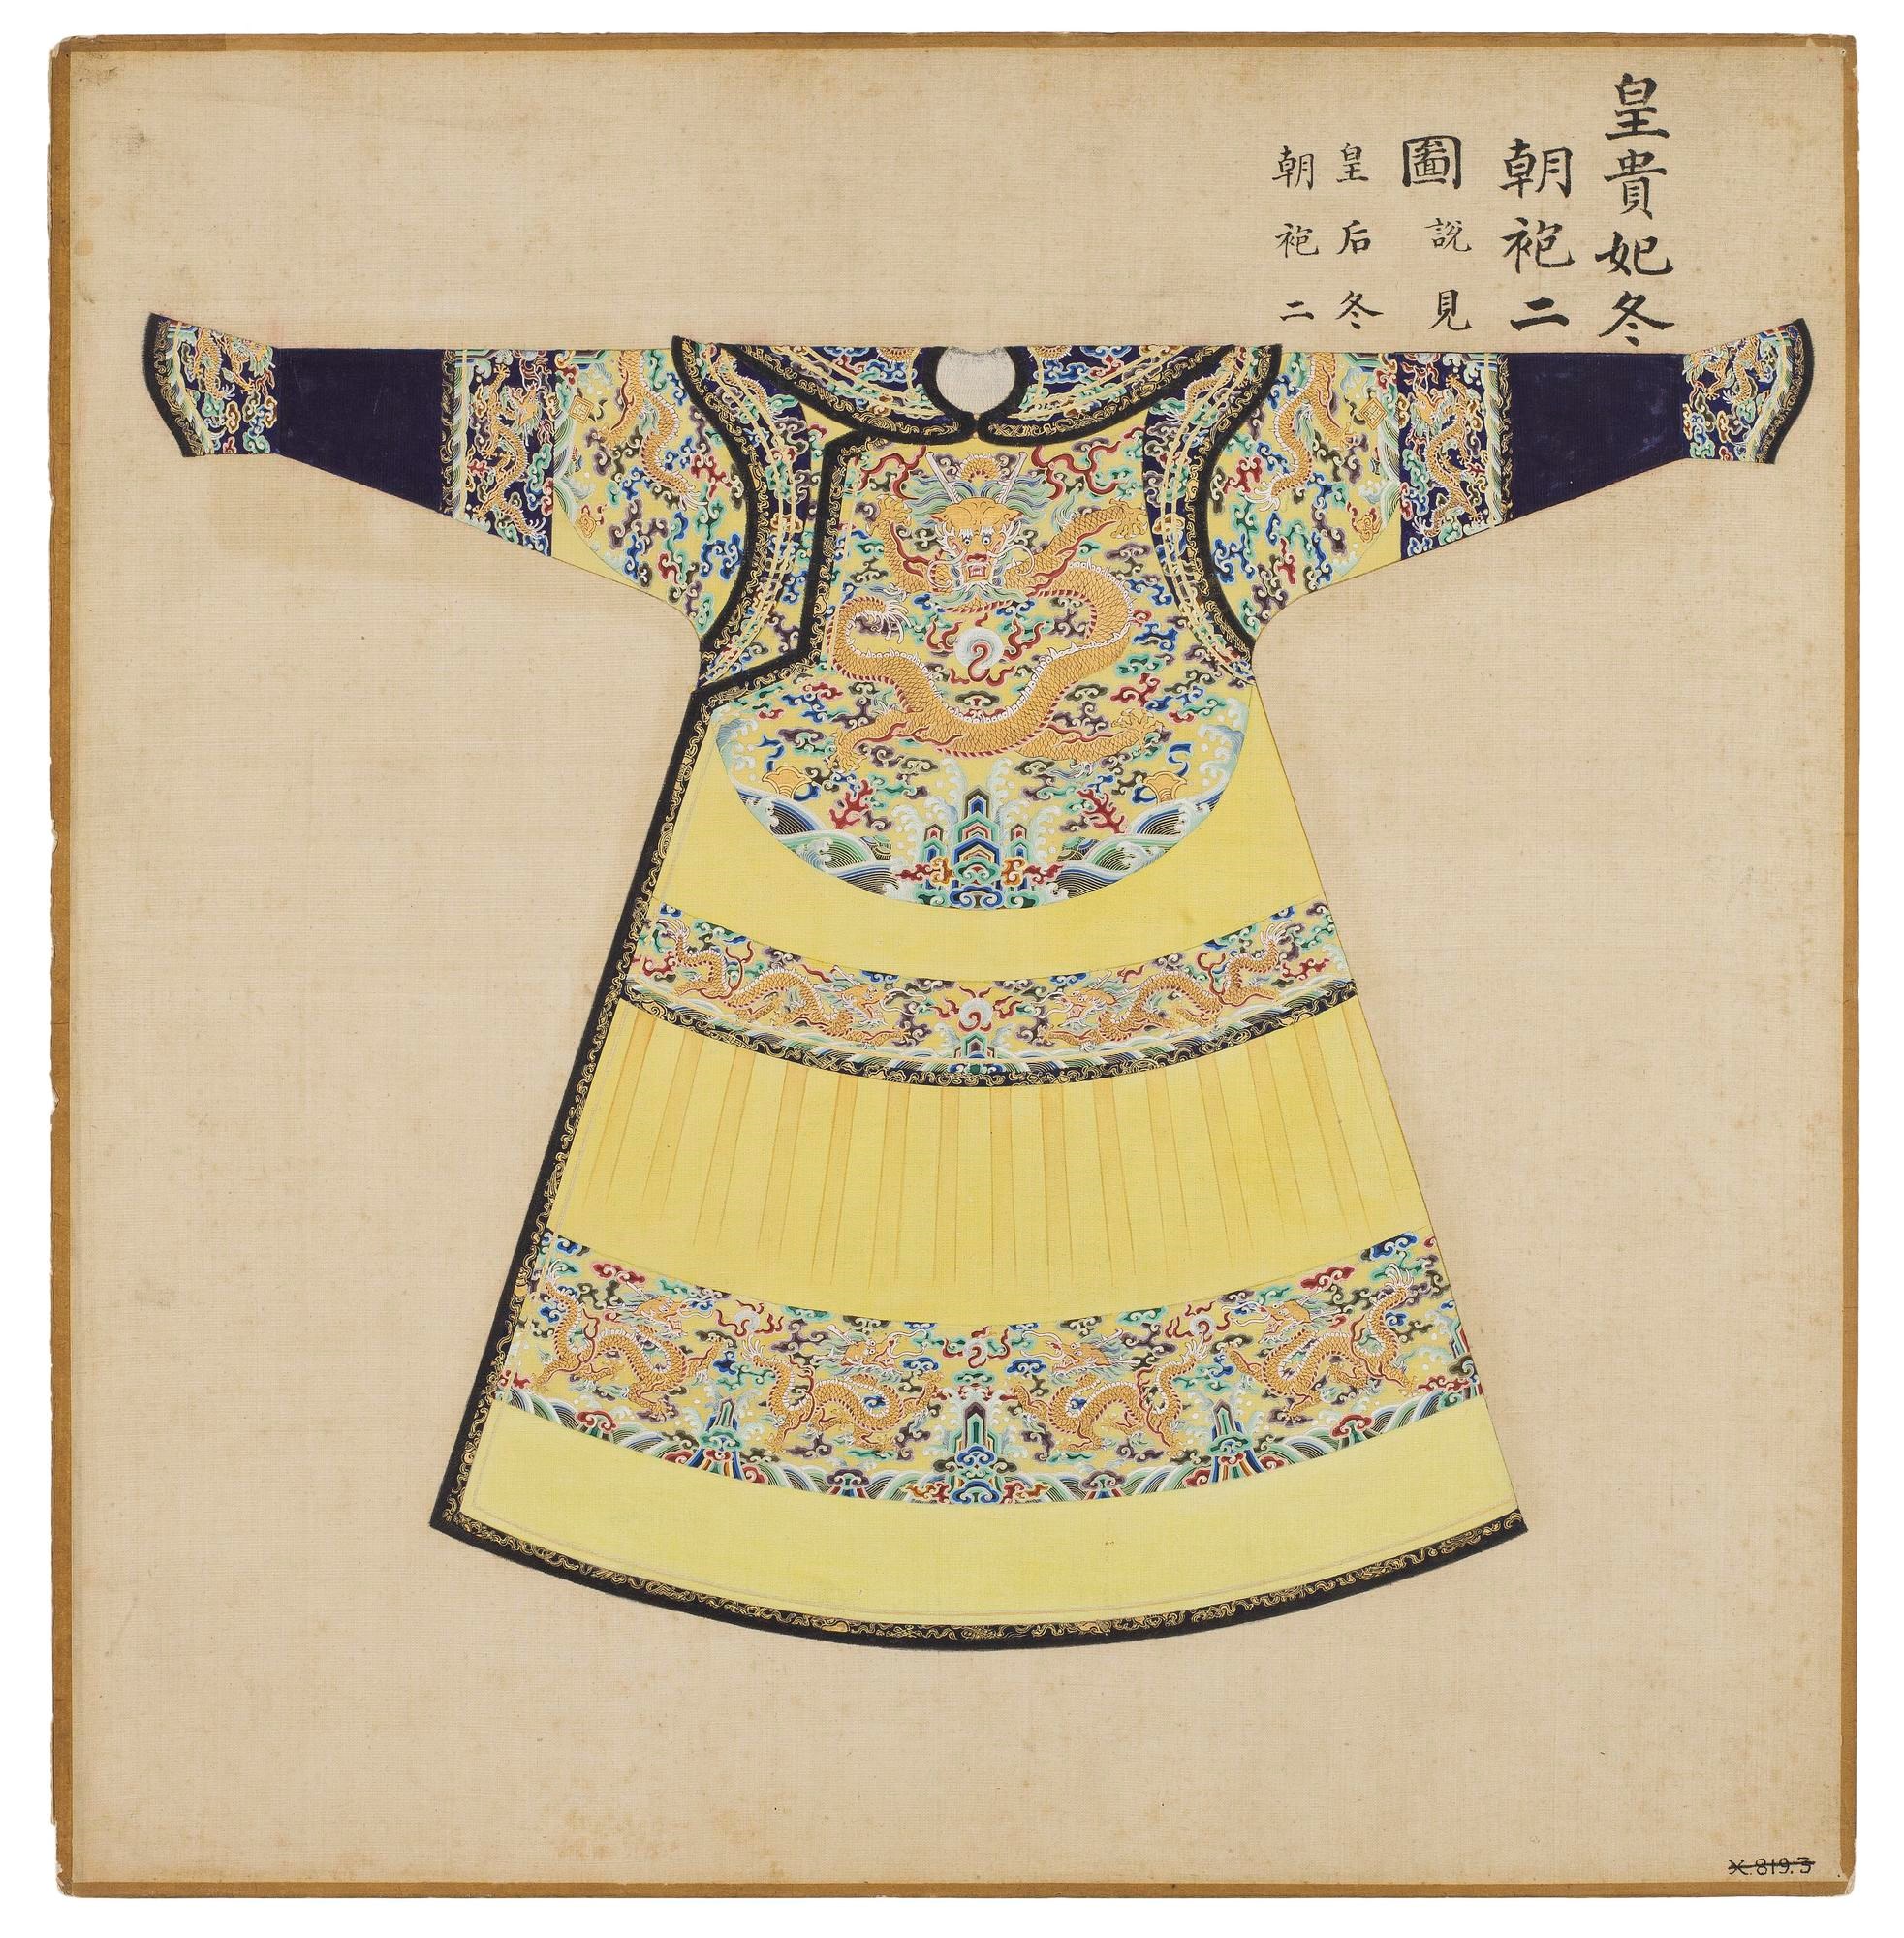 Painting on silk, Illustration of an Imperial First Rank Concubine's Winter Court Robe No. 2, from the "Huangchao liqi tushi" (Illustrations of Imperial Ritual Paraphernalia): China, Qing dynasty, c. 1760-1766.